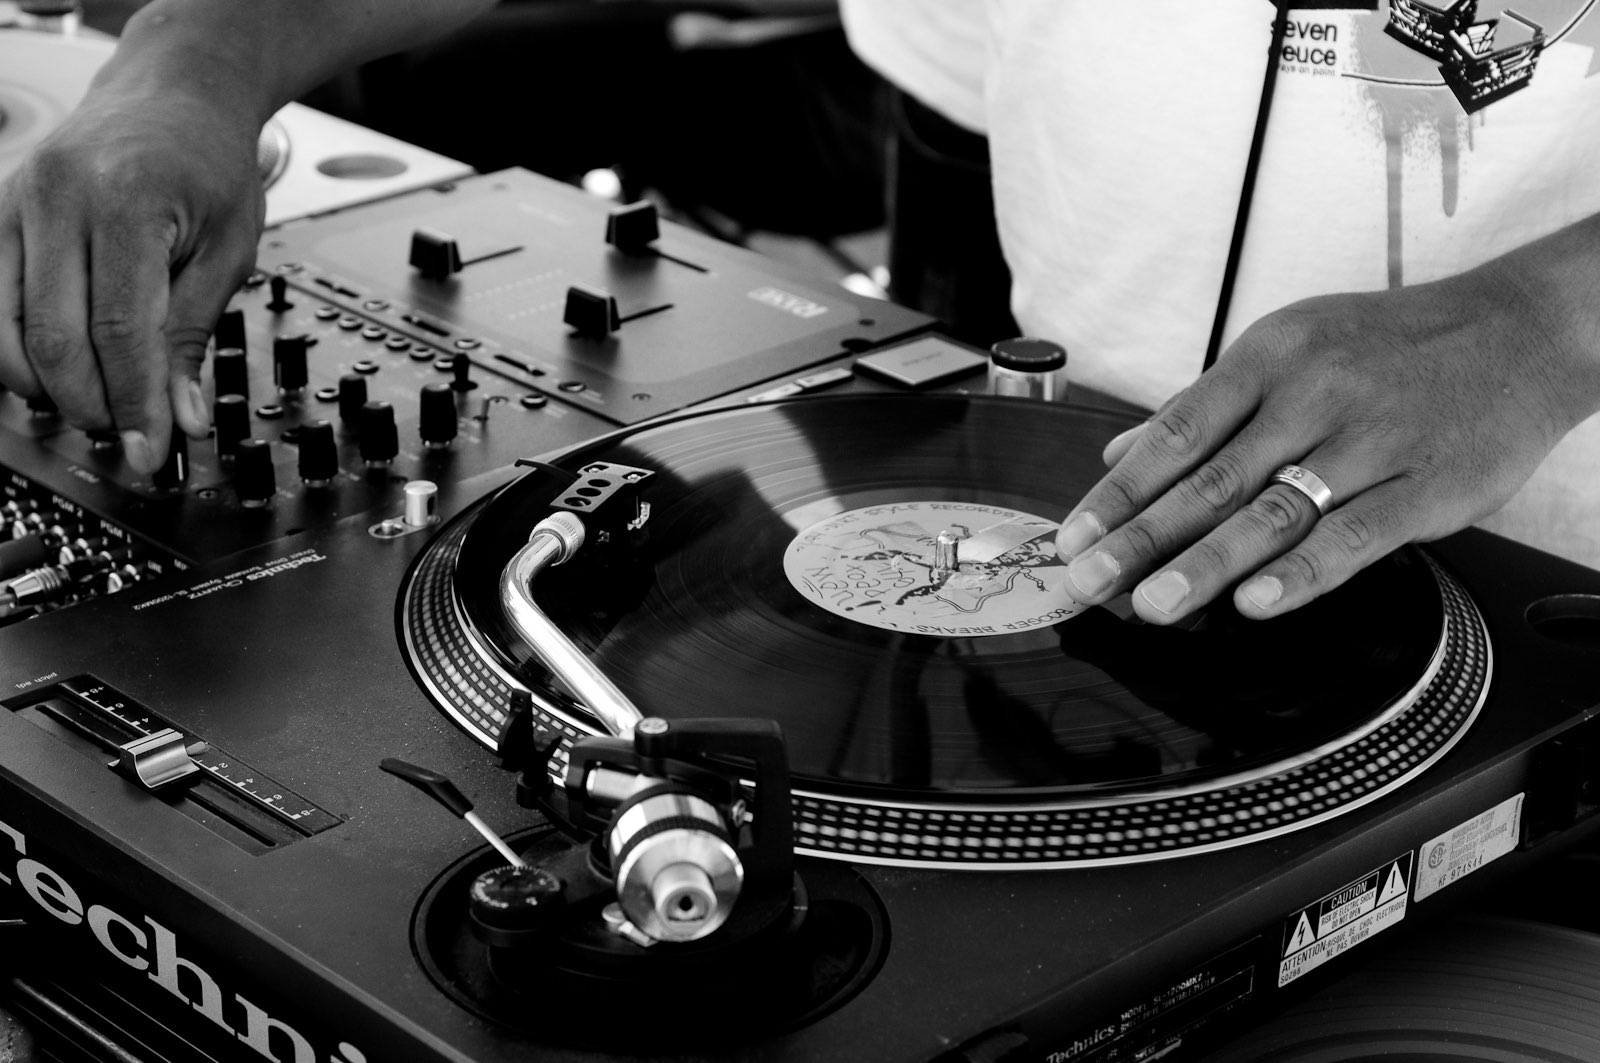 Photo of a turntable and a mixer used by a DJ. The DJ has one hand above the record and one hand on a knob on the mixer.